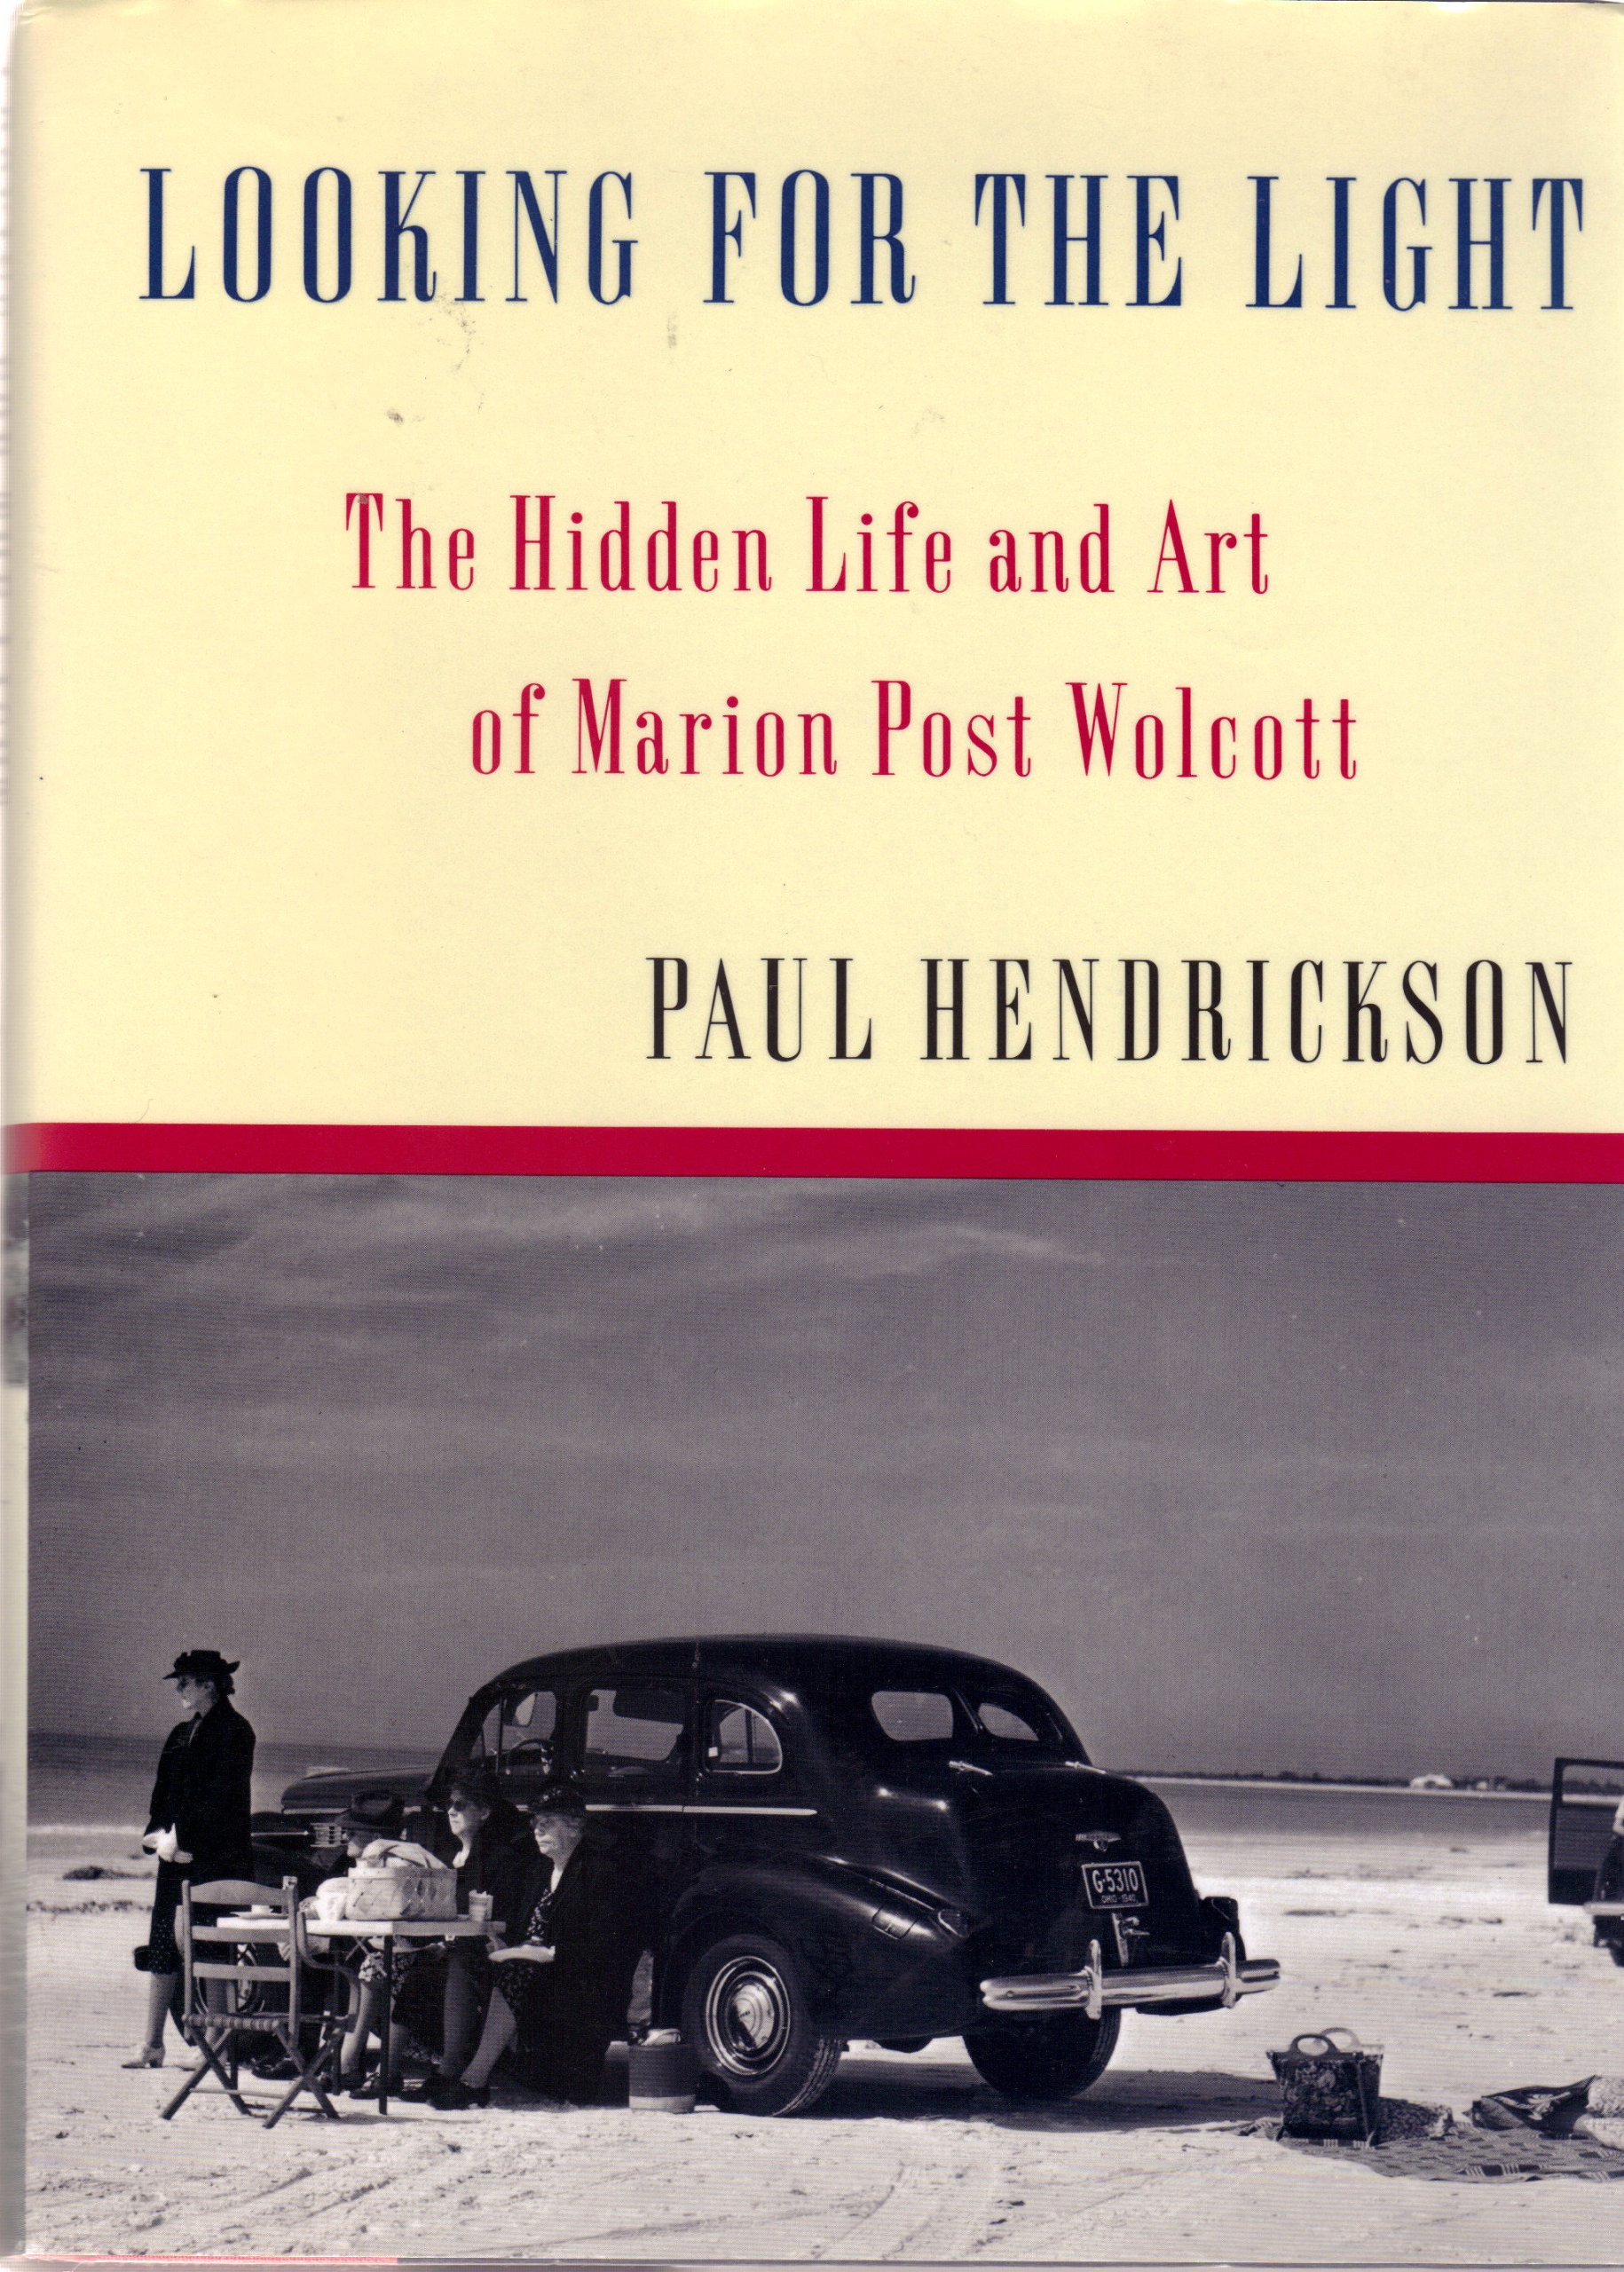 Looking for the Light: The Hidden Life and Art of Marion Post Wolcott